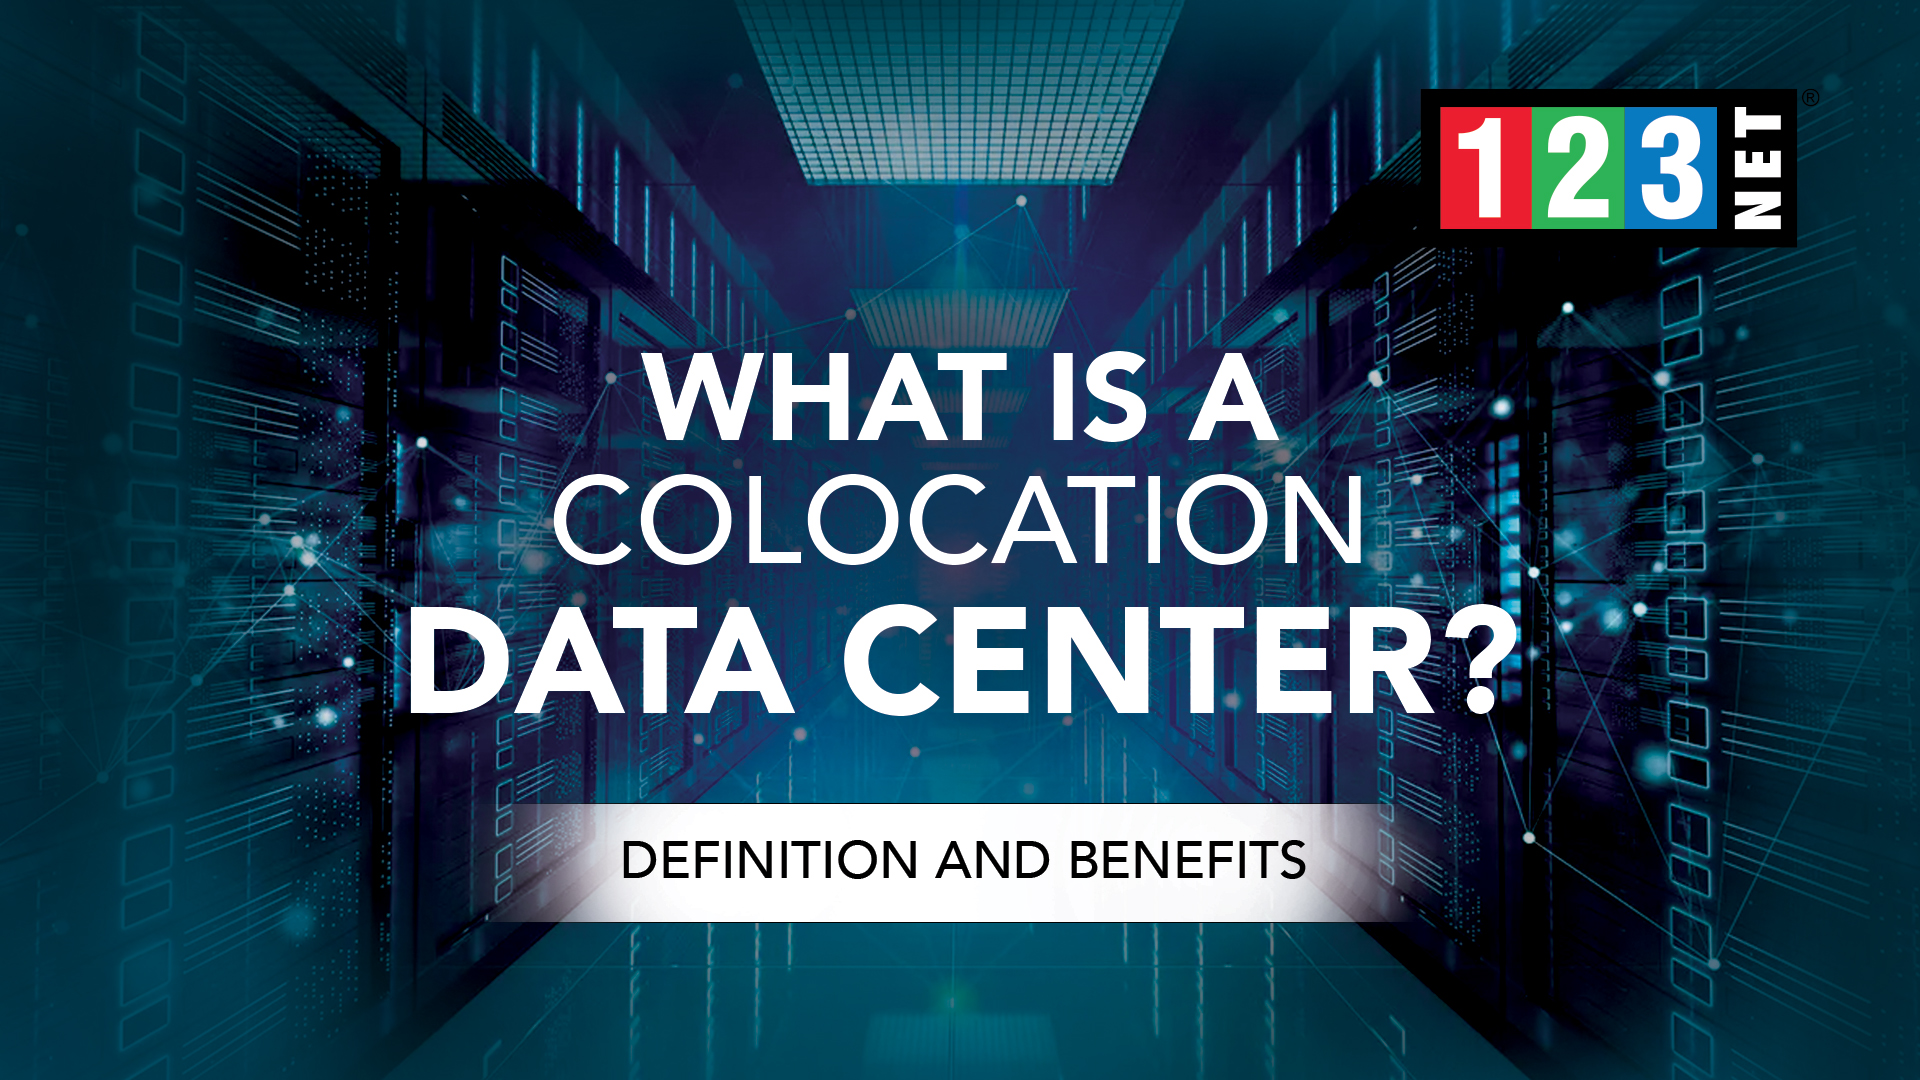 What is a colocation data center